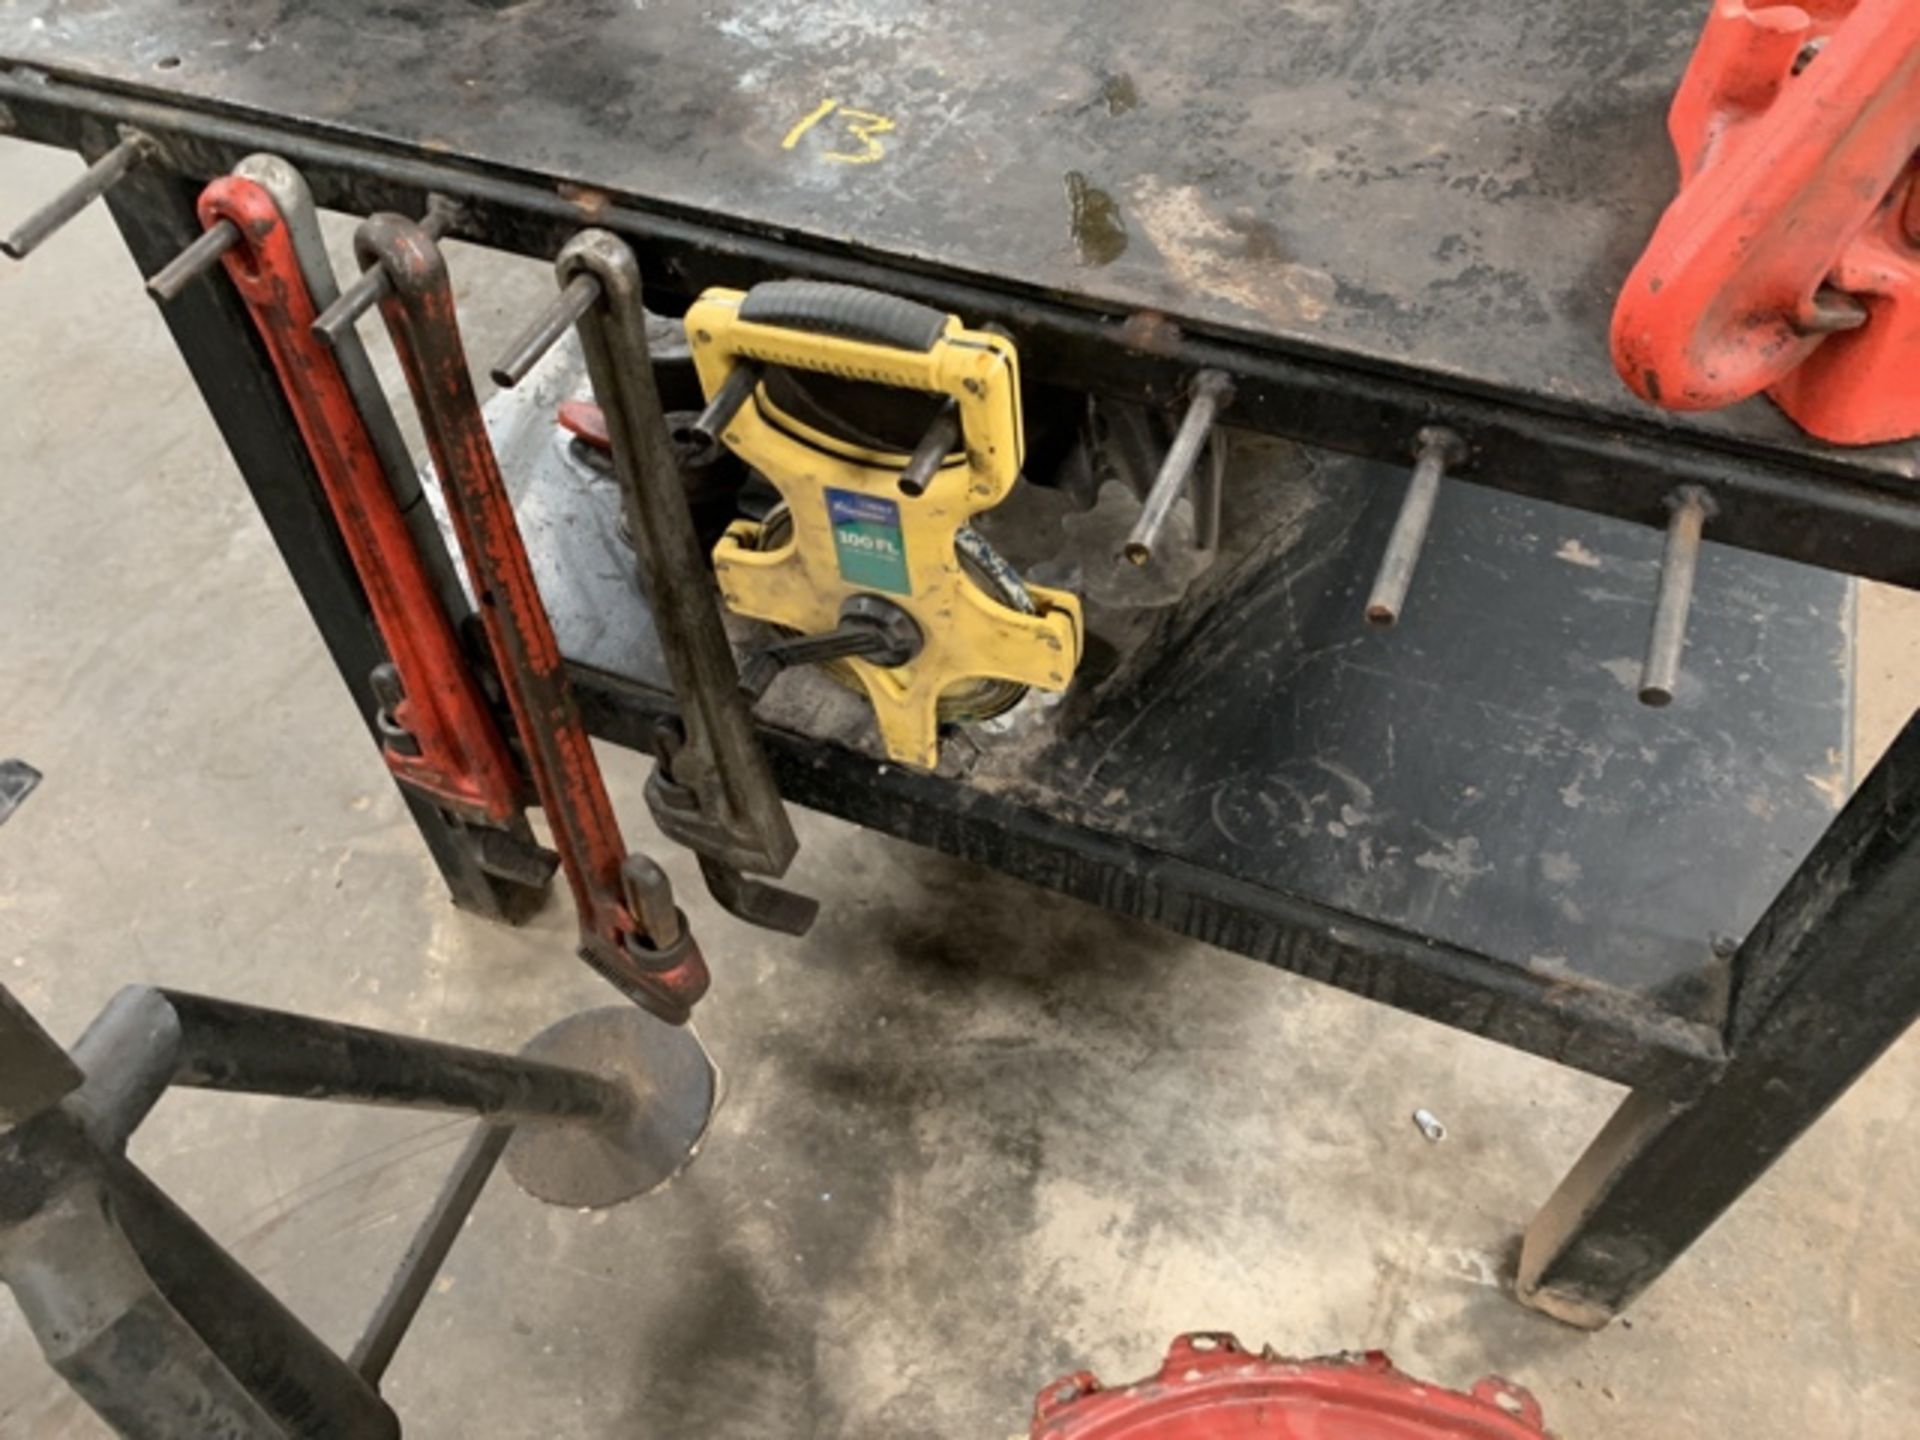 Shop Bench with Tools - Image 2 of 4